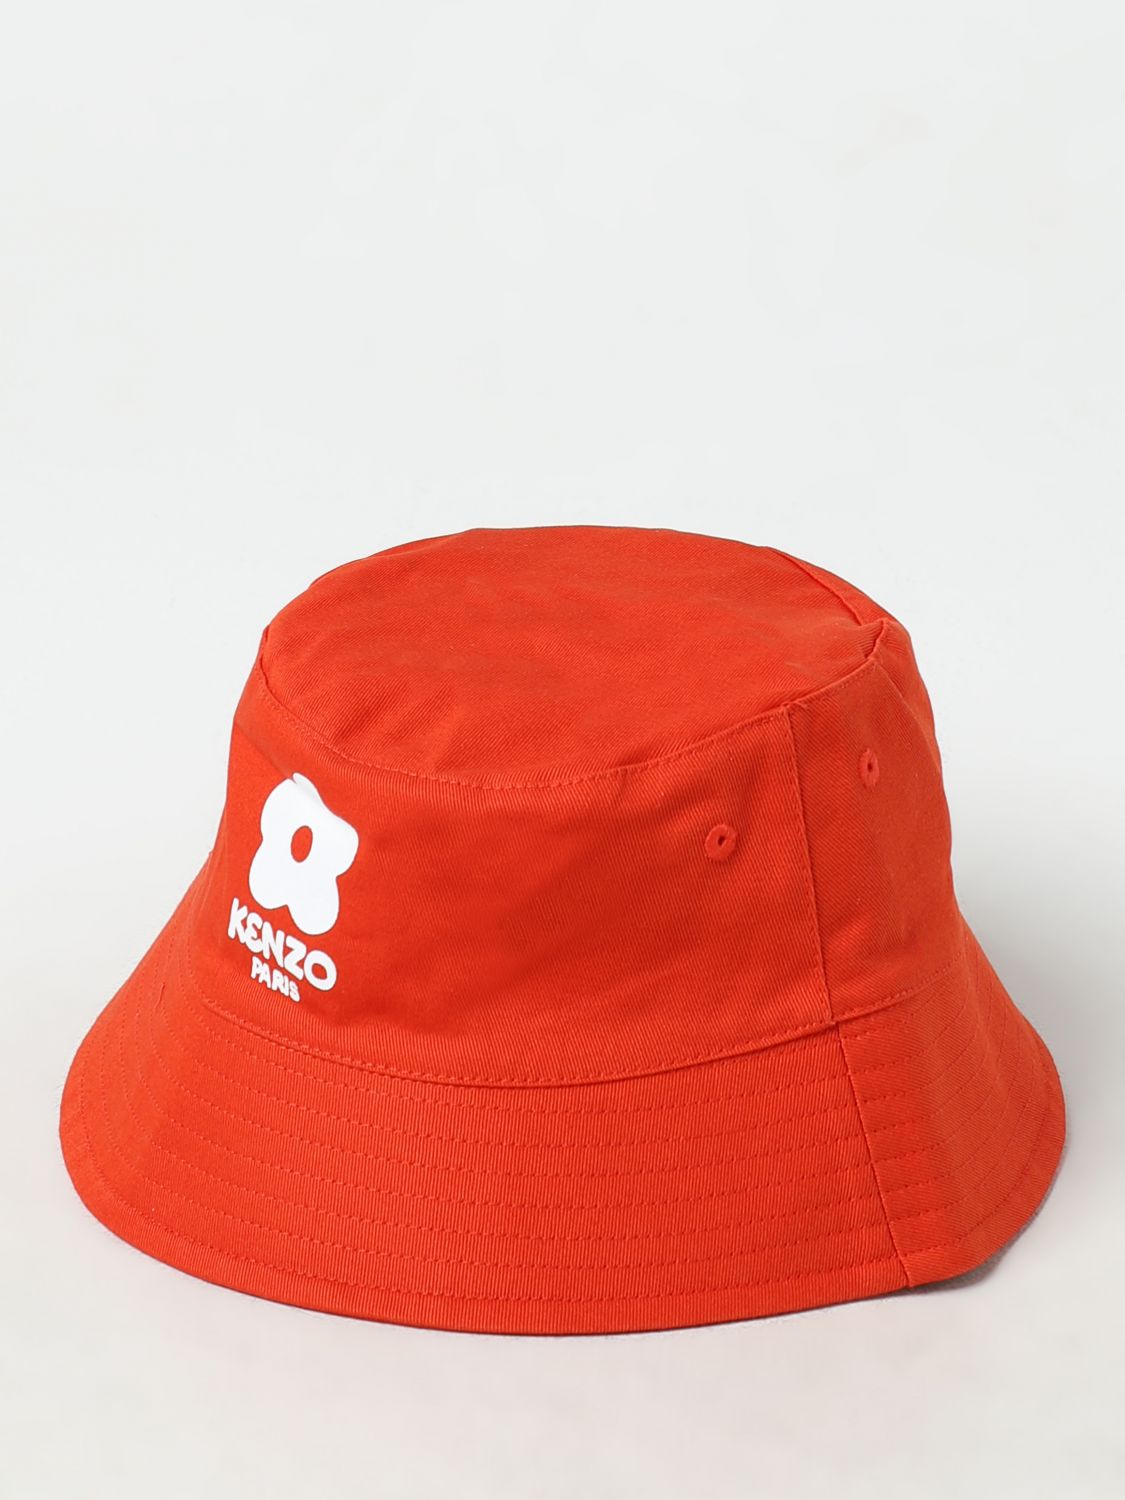 Kenzo Hat  Kids Kids Colour Red